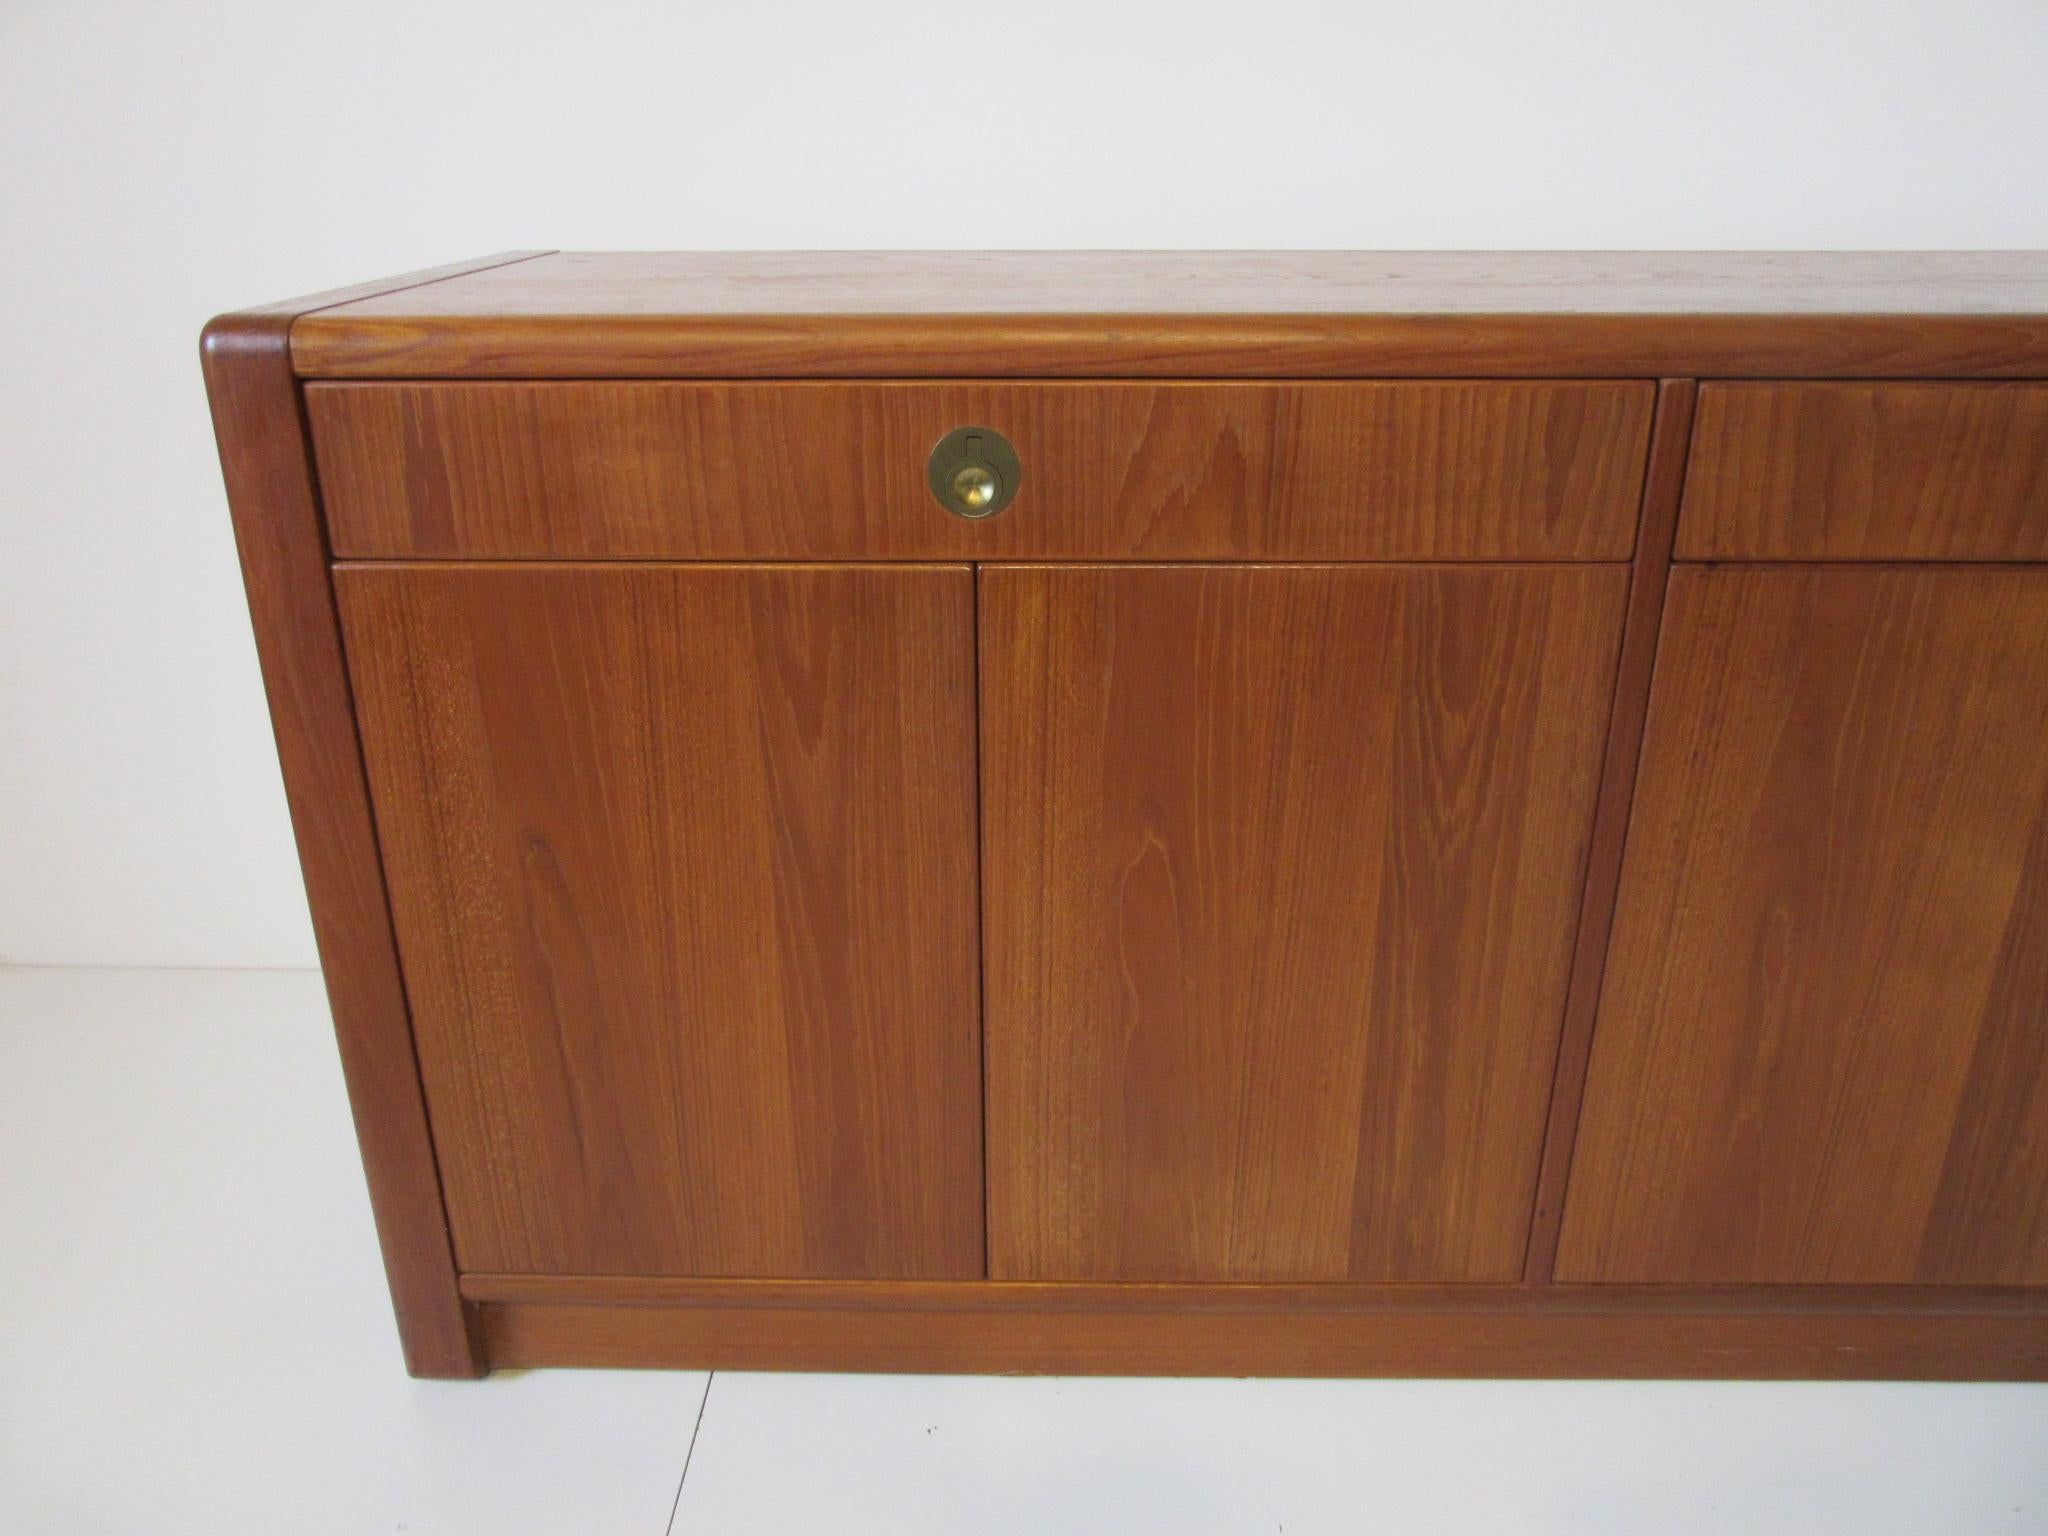 A medium dark toned teak server / chest / credenza with inset finger joint construction, four doors that have push touch latches and adjustable shelves. The two upper drawers have heavy brass pulls manufactured by D - Scan Singapore from the Captain